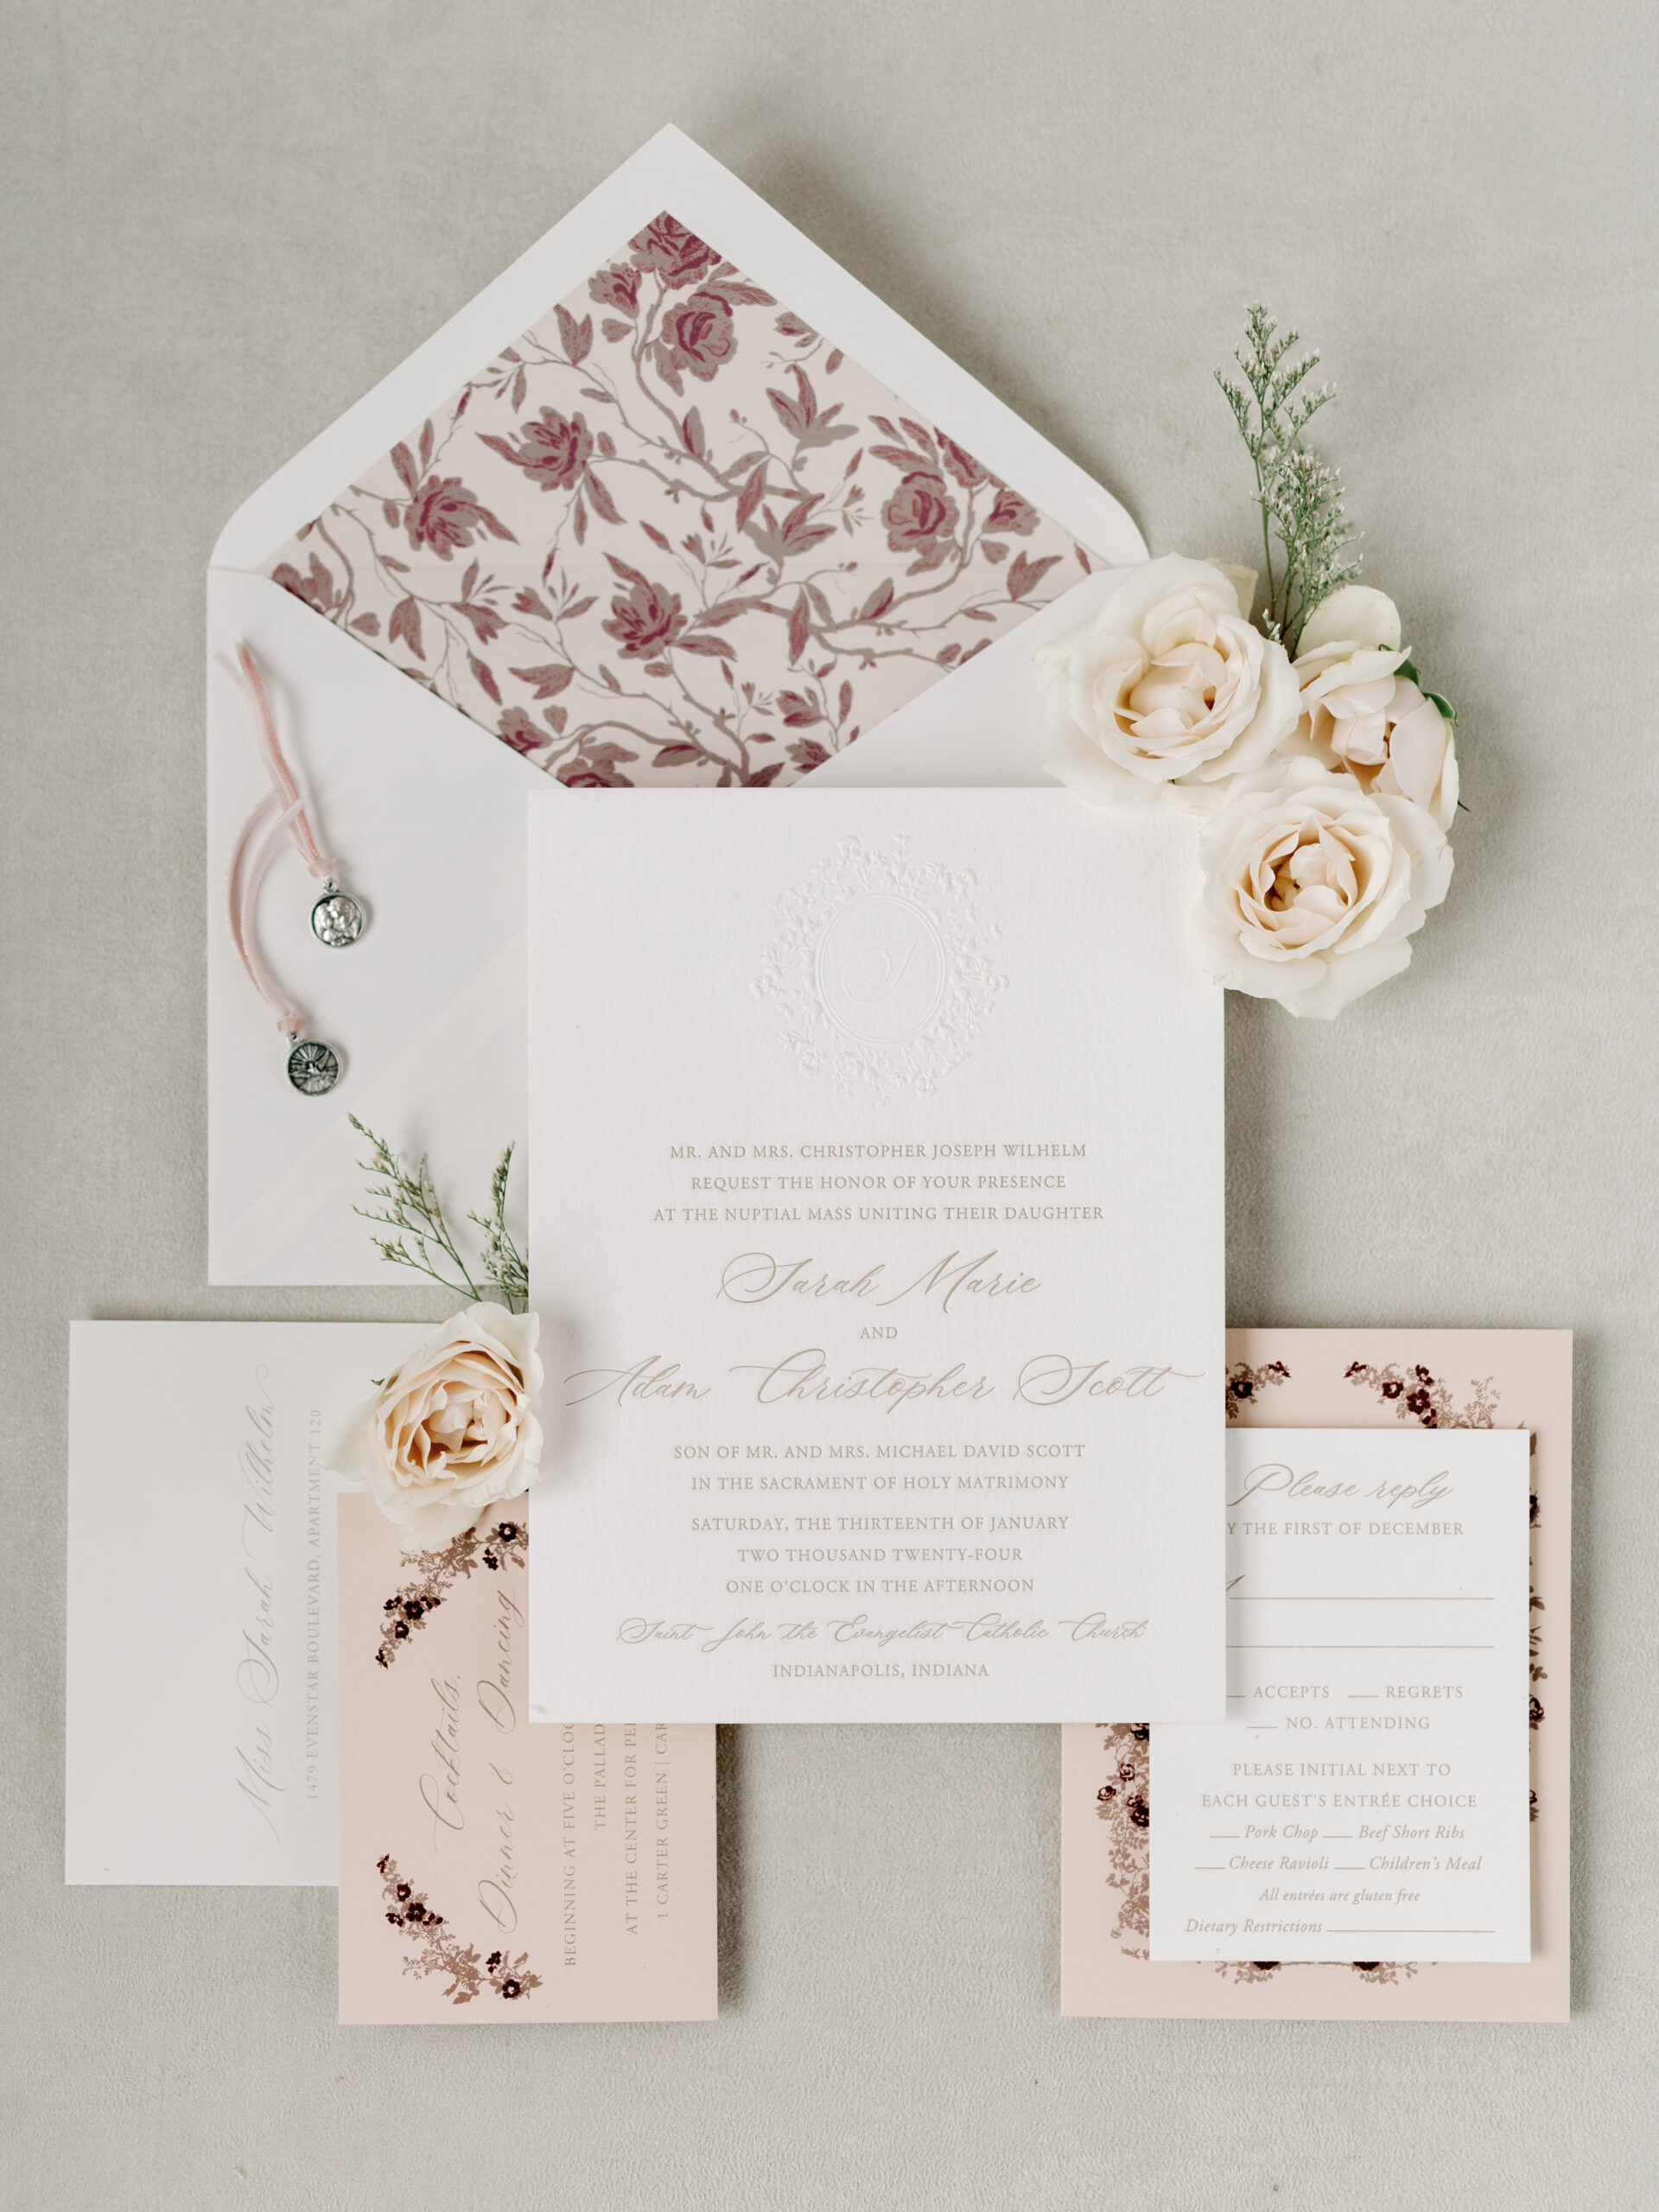 An invitation set in shades of blush and Burgundy 